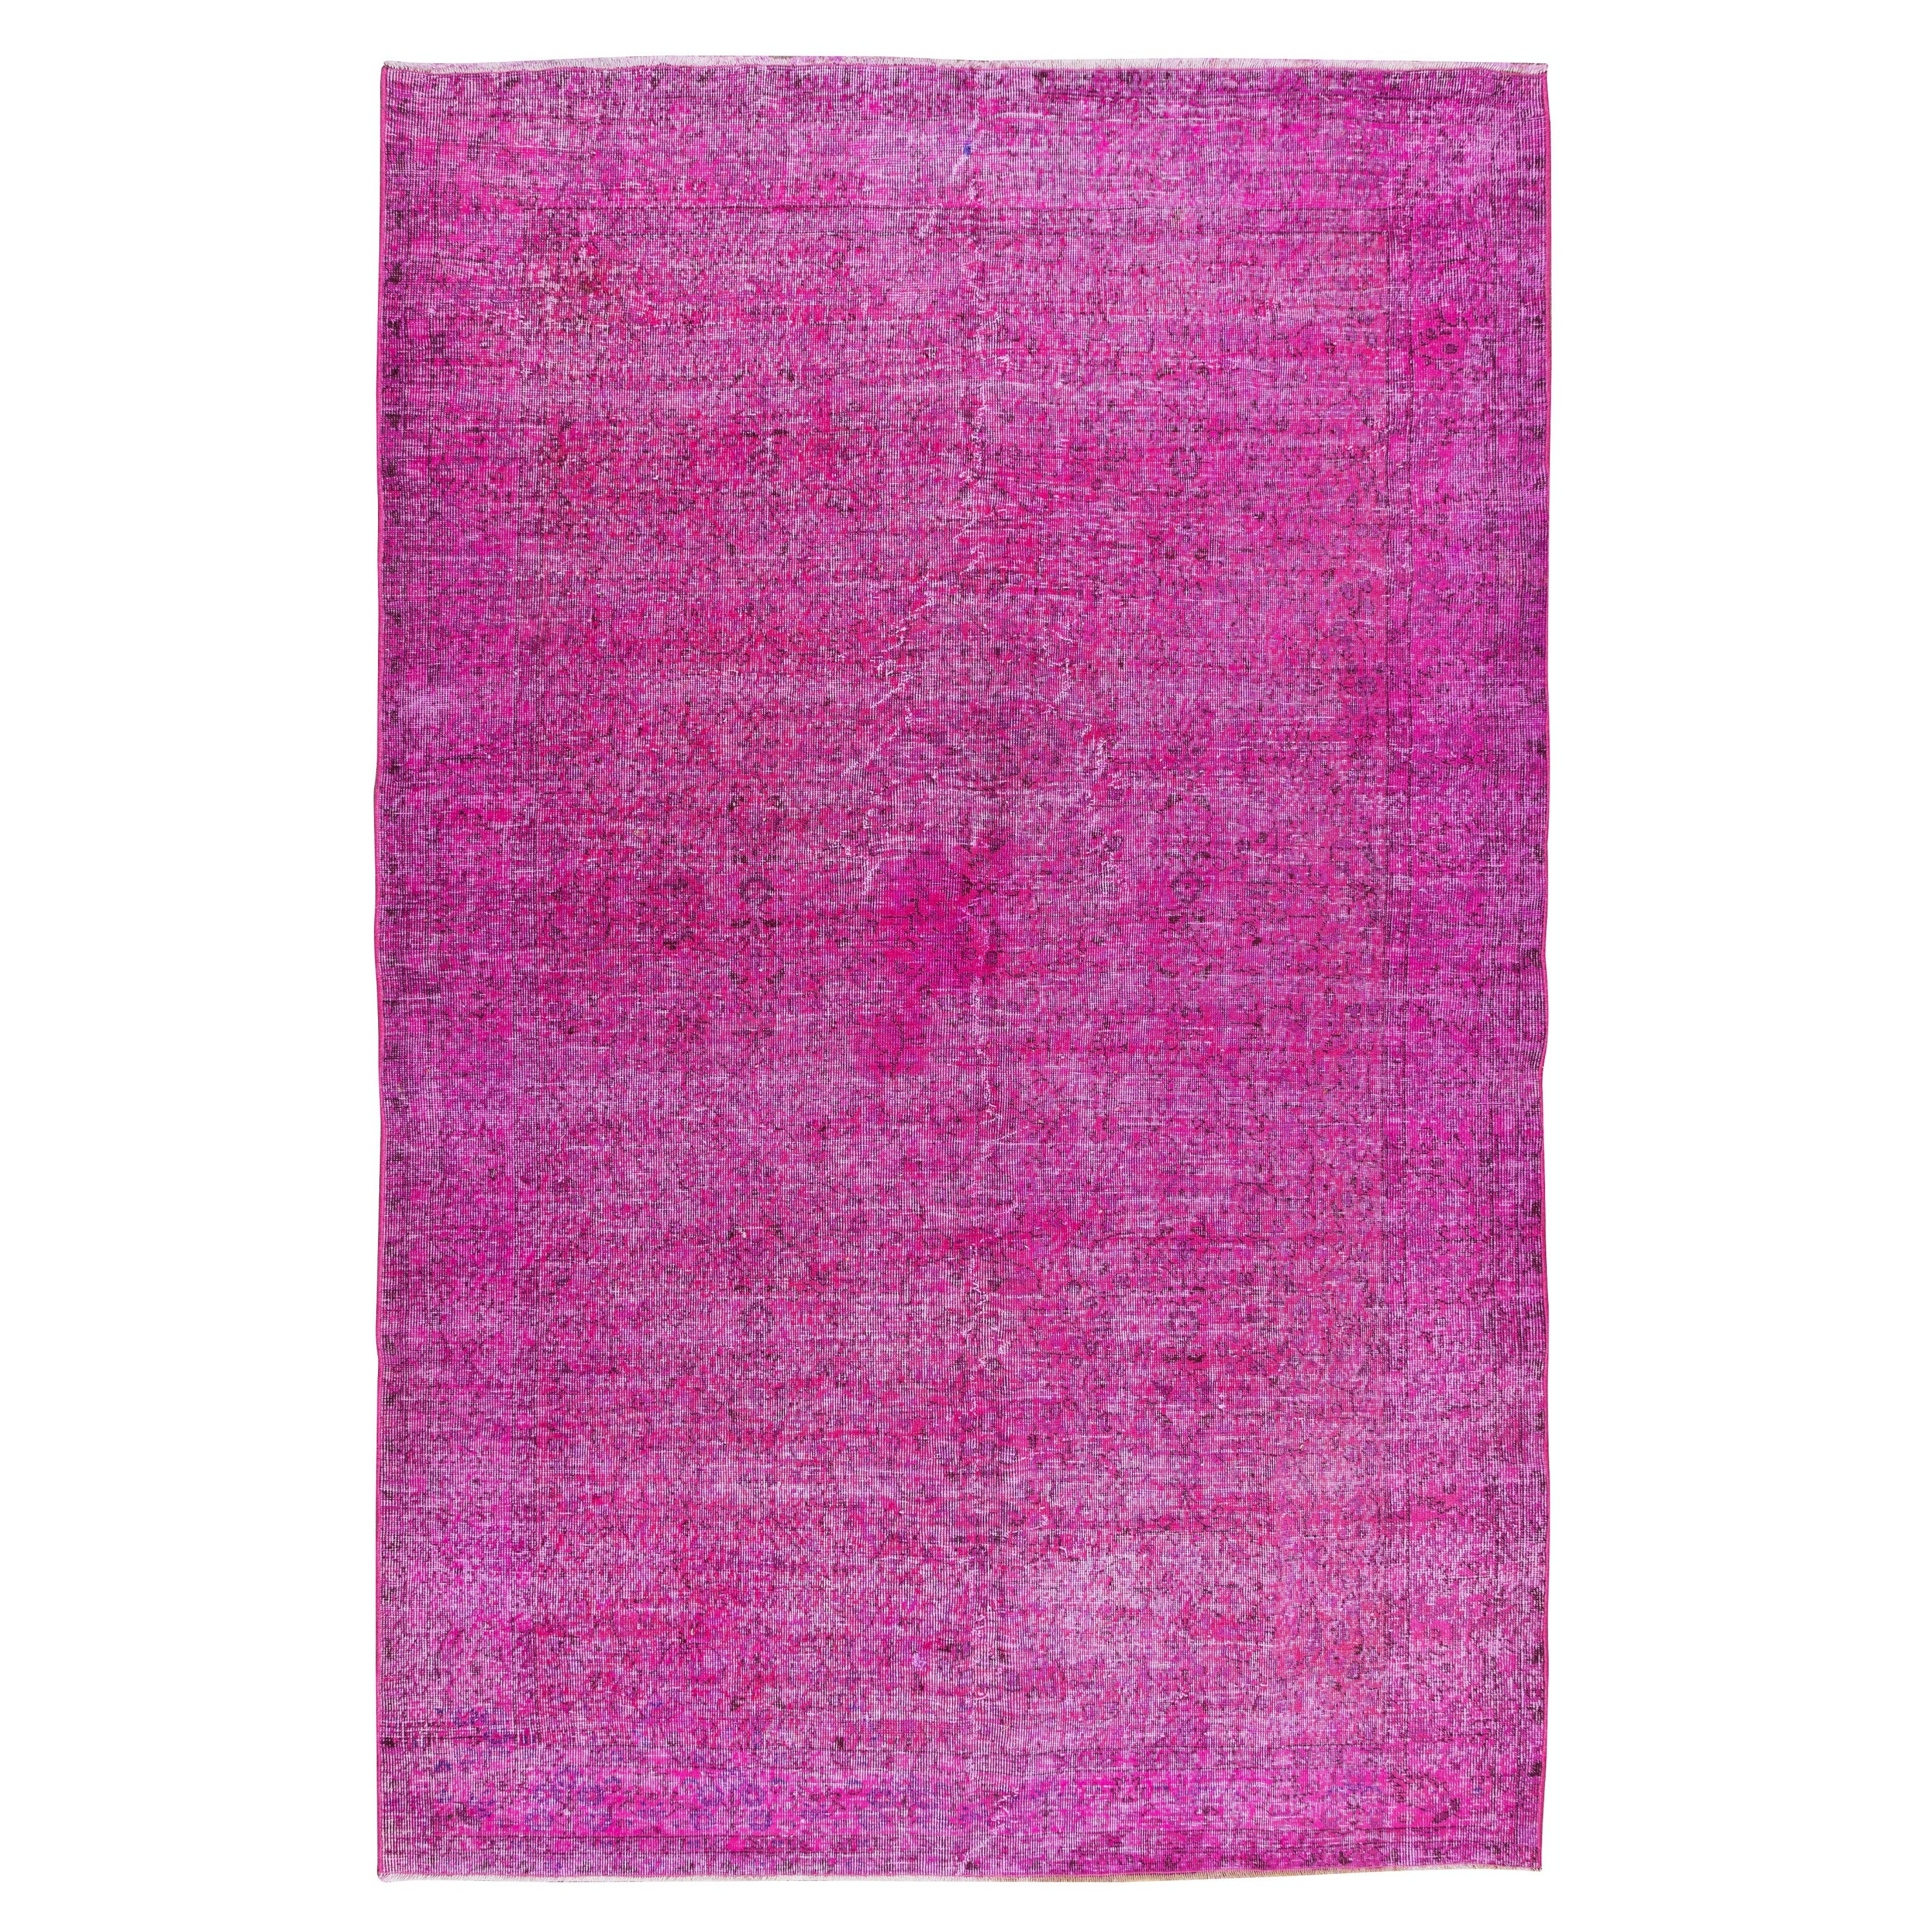 6.7x10.4 Ft Hand Knotted Anatolian Area Rug in Fuchsia Pink 4 Modern Interiors